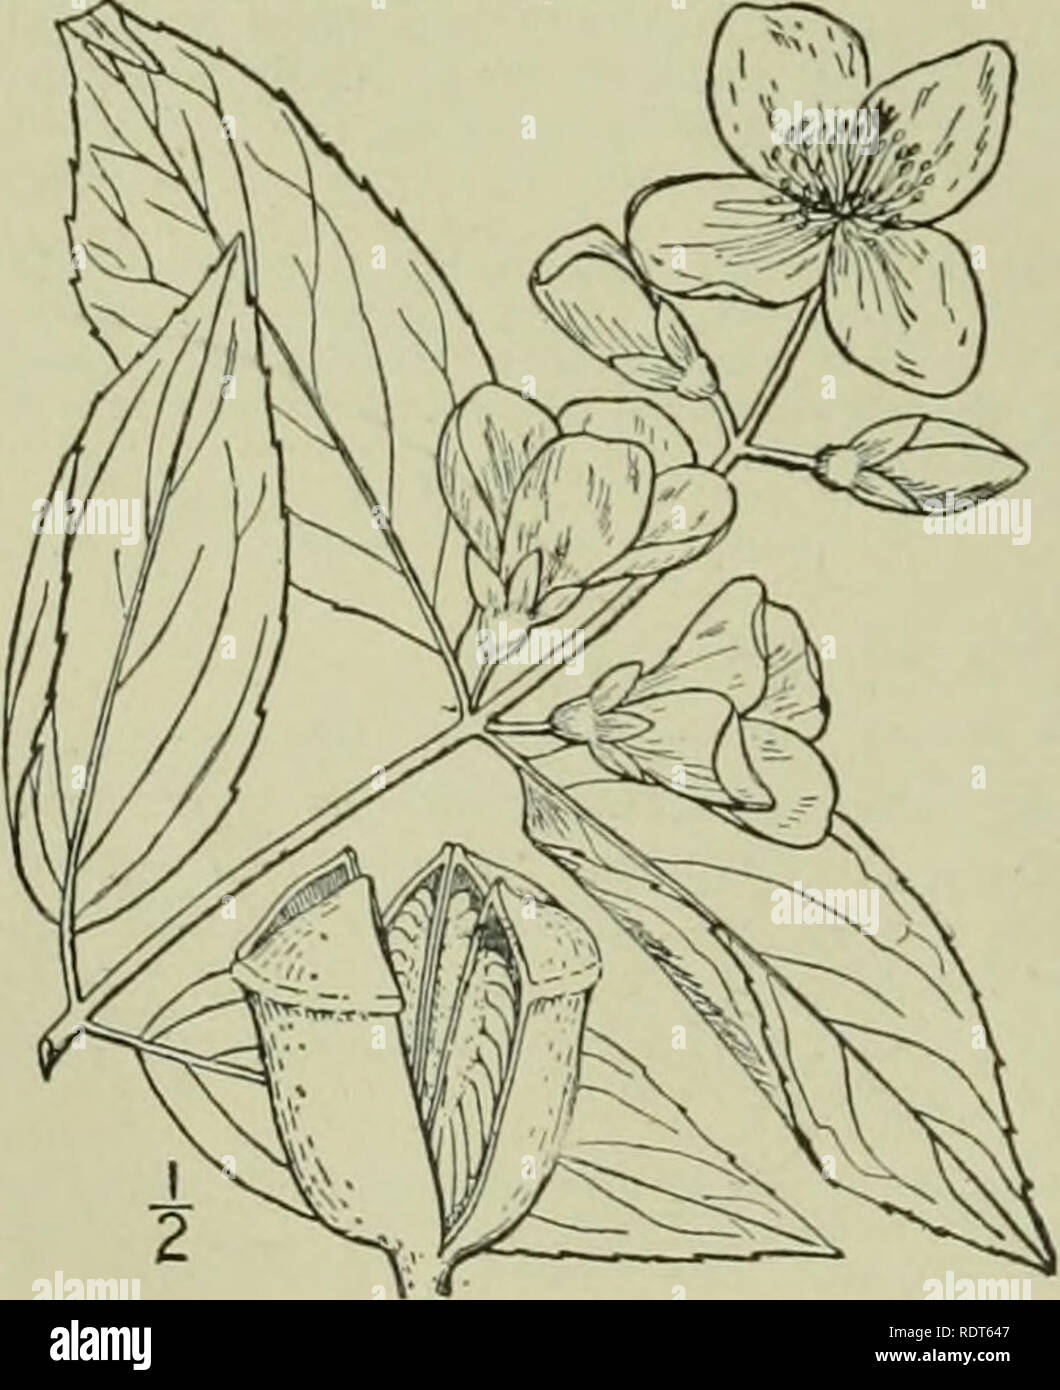 . An illustrated flora of the northern United States, Canada and the British possessions : from Newfoundland to the parallel of the southern boundary of Virginia and from the Atlantic Ocean westward to the 102nd meridian. Botany. I. 3. Philadelphus coronarius L. Garden Syringa. ]Iock Orange. Fig. 2191. Philadelphus coronarius L. Sp. PI. 470. 1753. A shrub 8°-io° high. Leaves short-petioled, oval, elliptic or ovate-elliptic, 2-4' long, glabrous above, pubescent beneath, acute or acuminate at the apex, rounded or narrowed at the base, den- ticulate with distant teeth. 3-nerved; flowers numerous Stock Photo